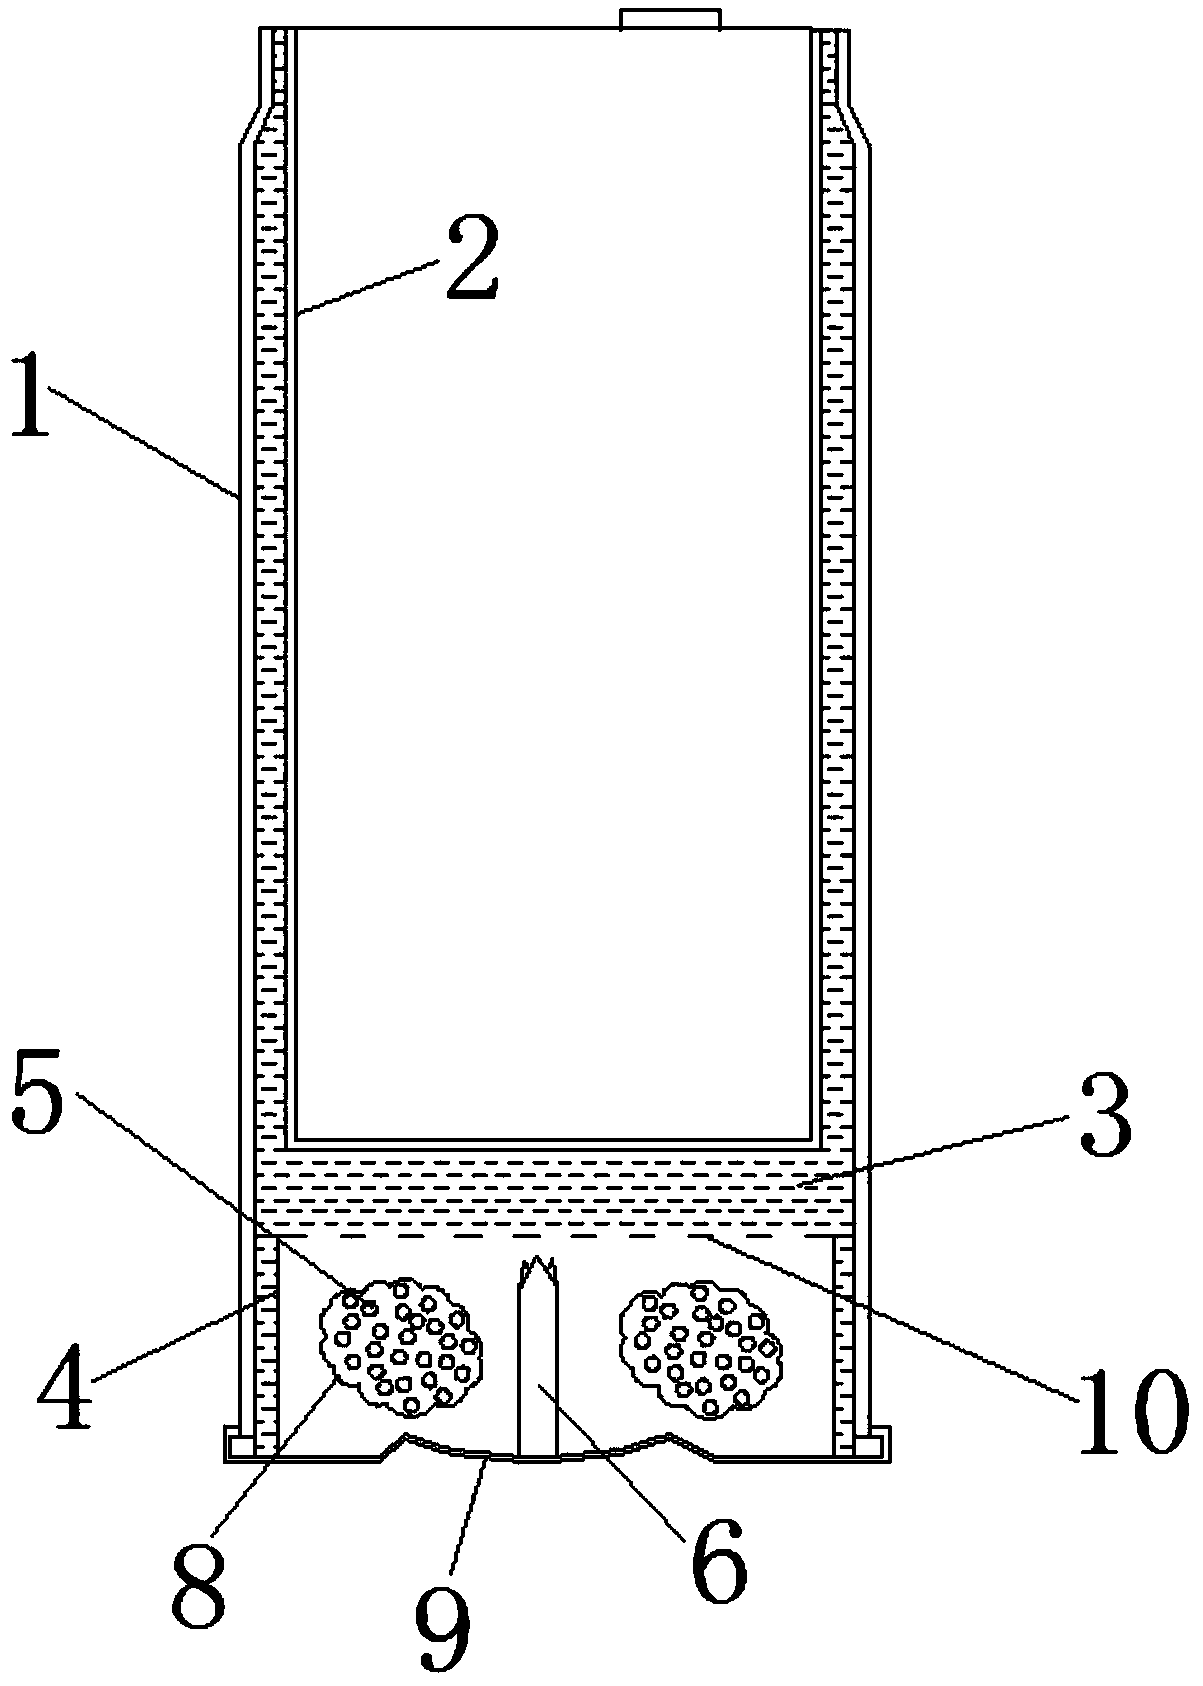 Self-heating or self-cooling container with pressure relief structure